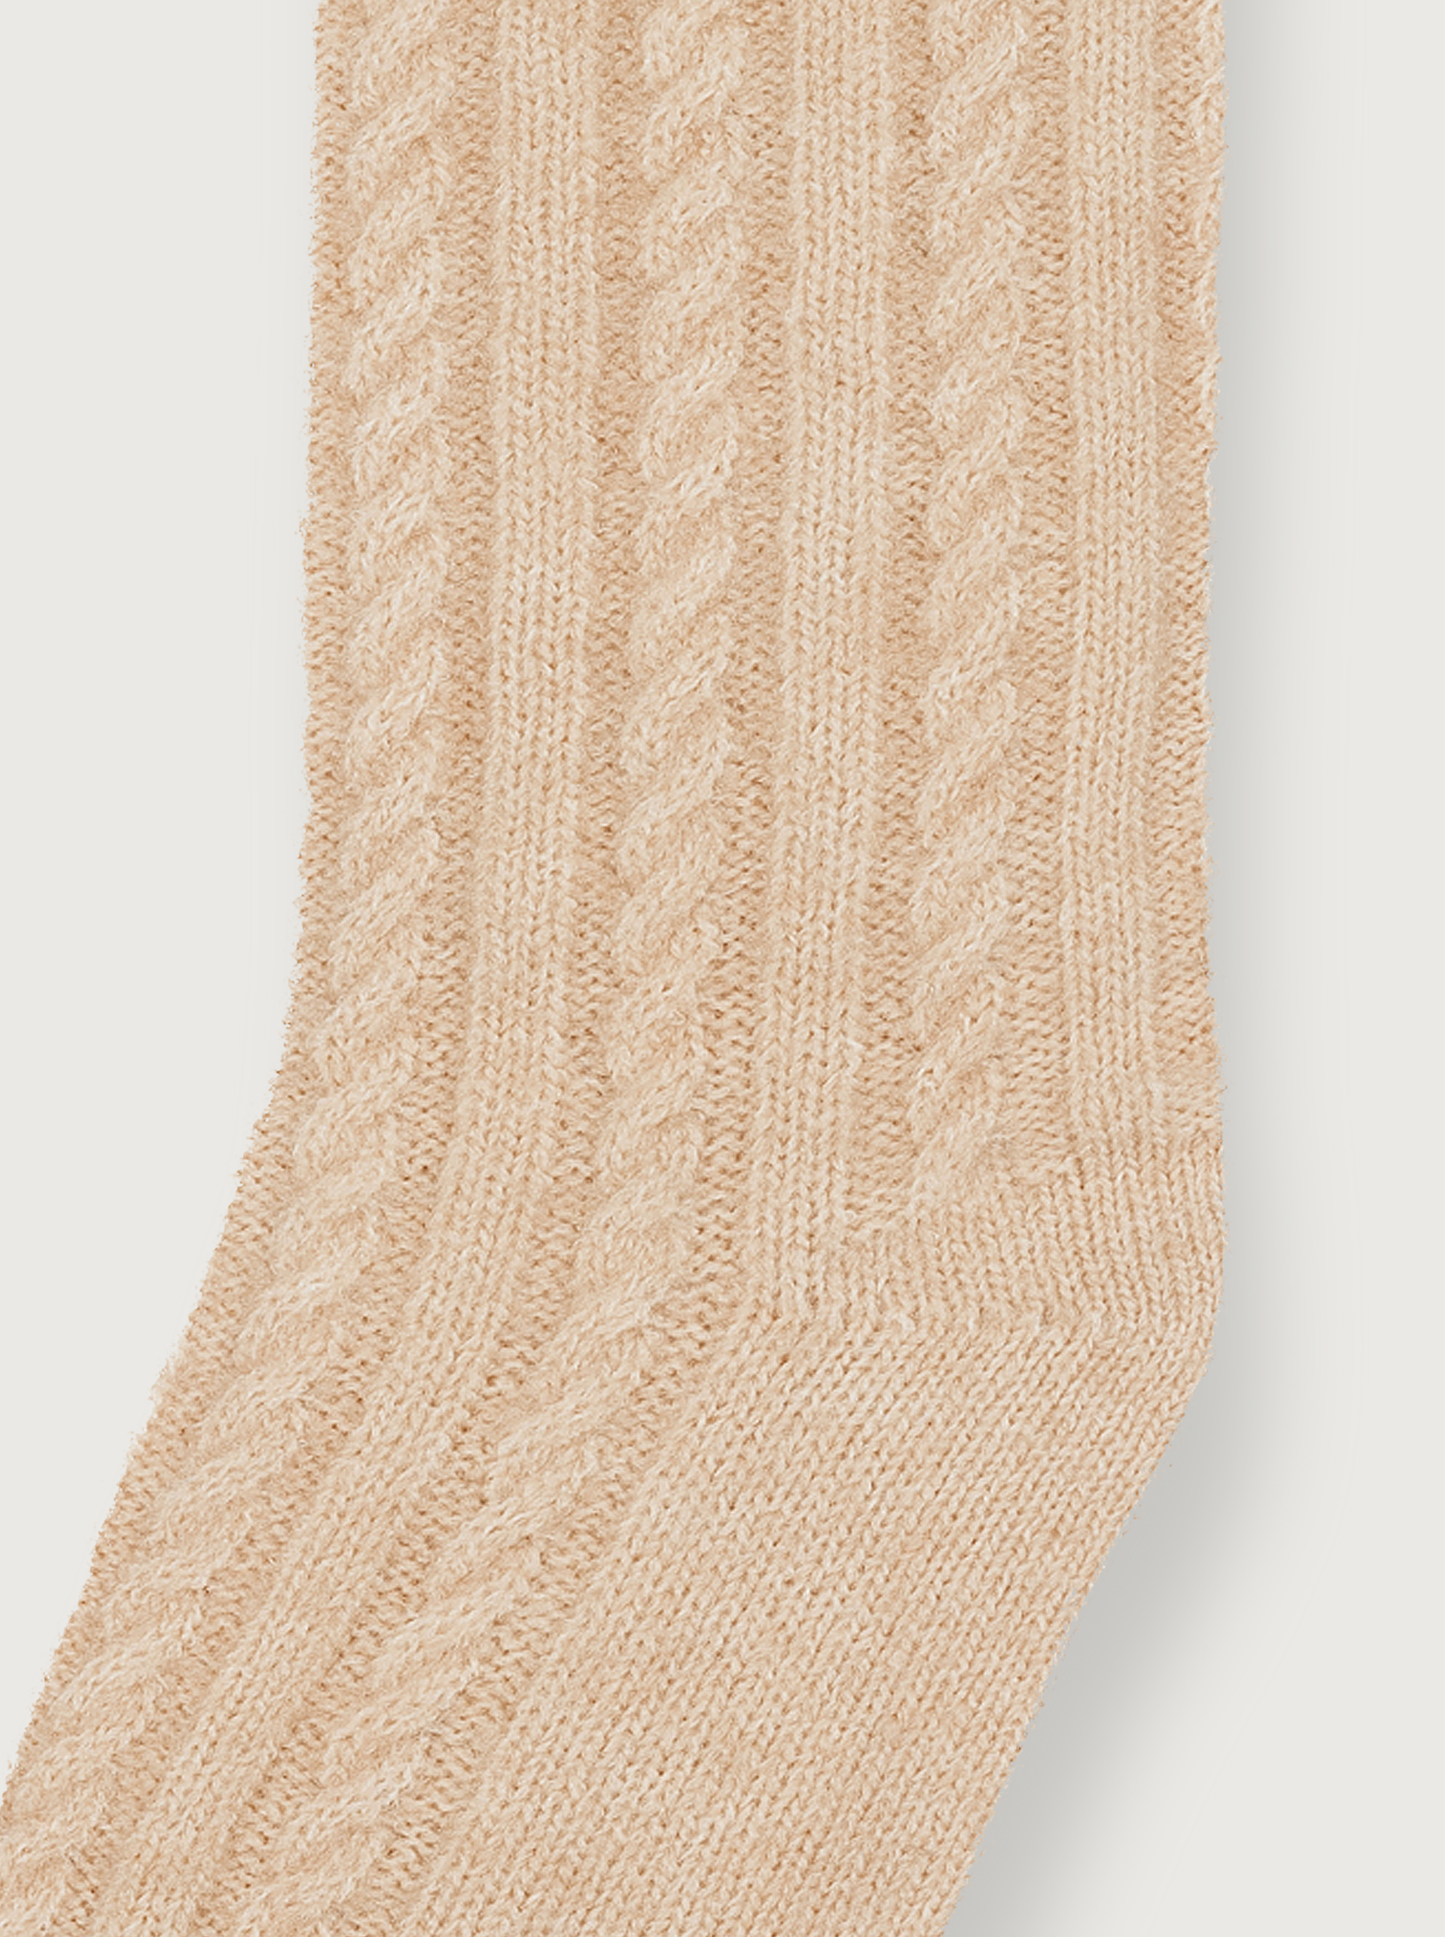 wool and cashmere socks in beige